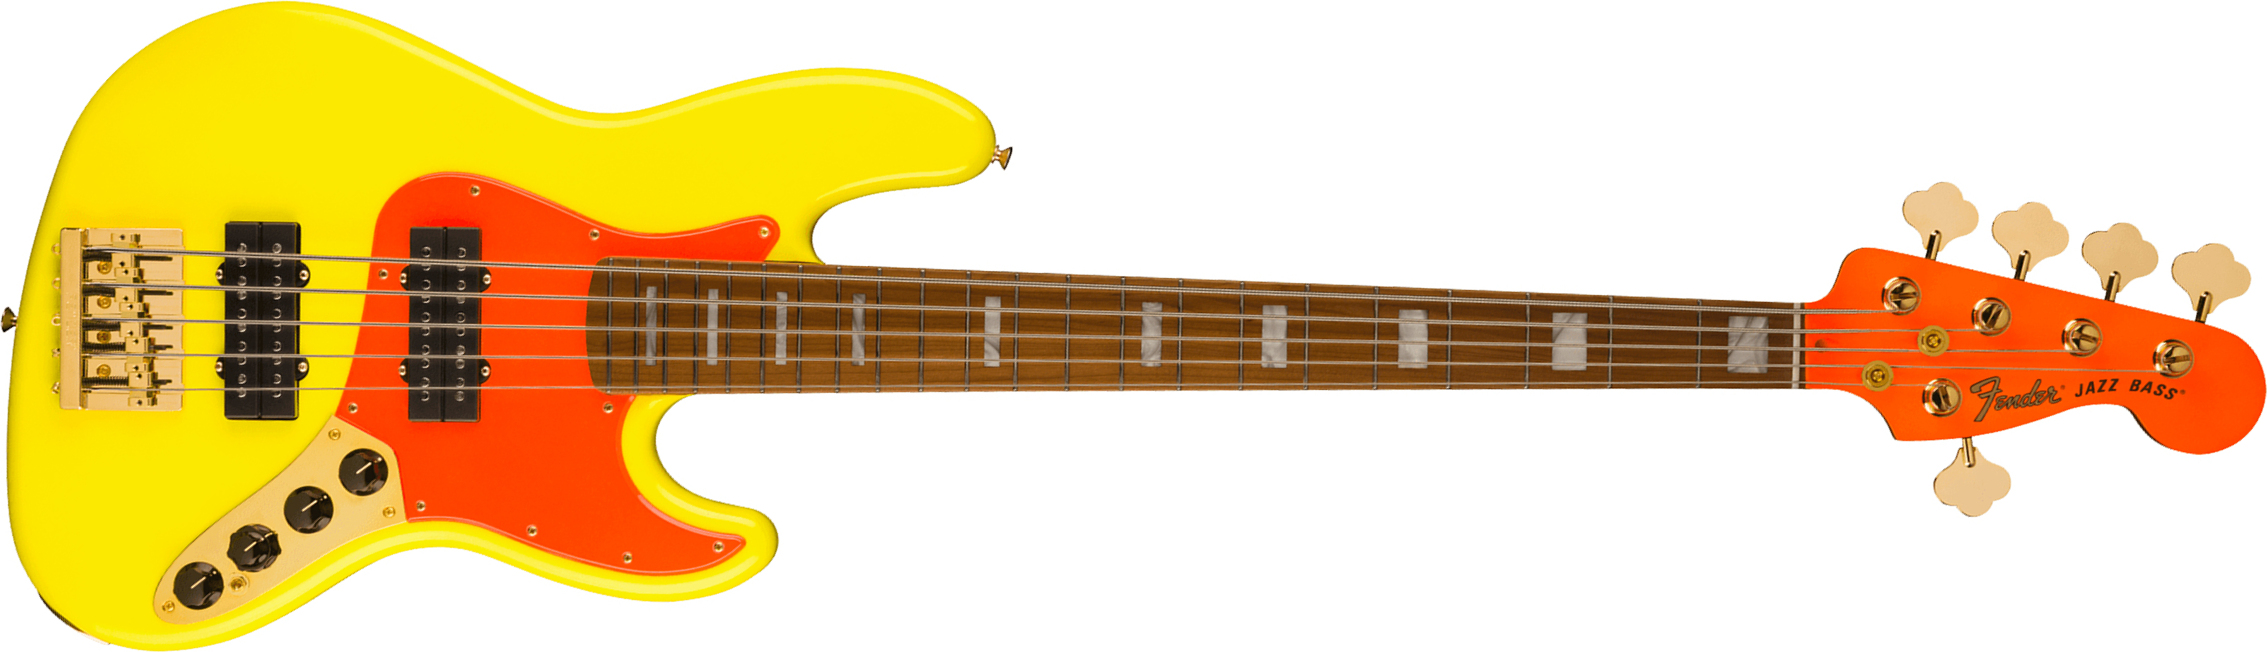 Fender Jazz Bass Mononeon V Mex Signature 5c Active Mn - Neon Yellow - Solid body electric bass - Main picture